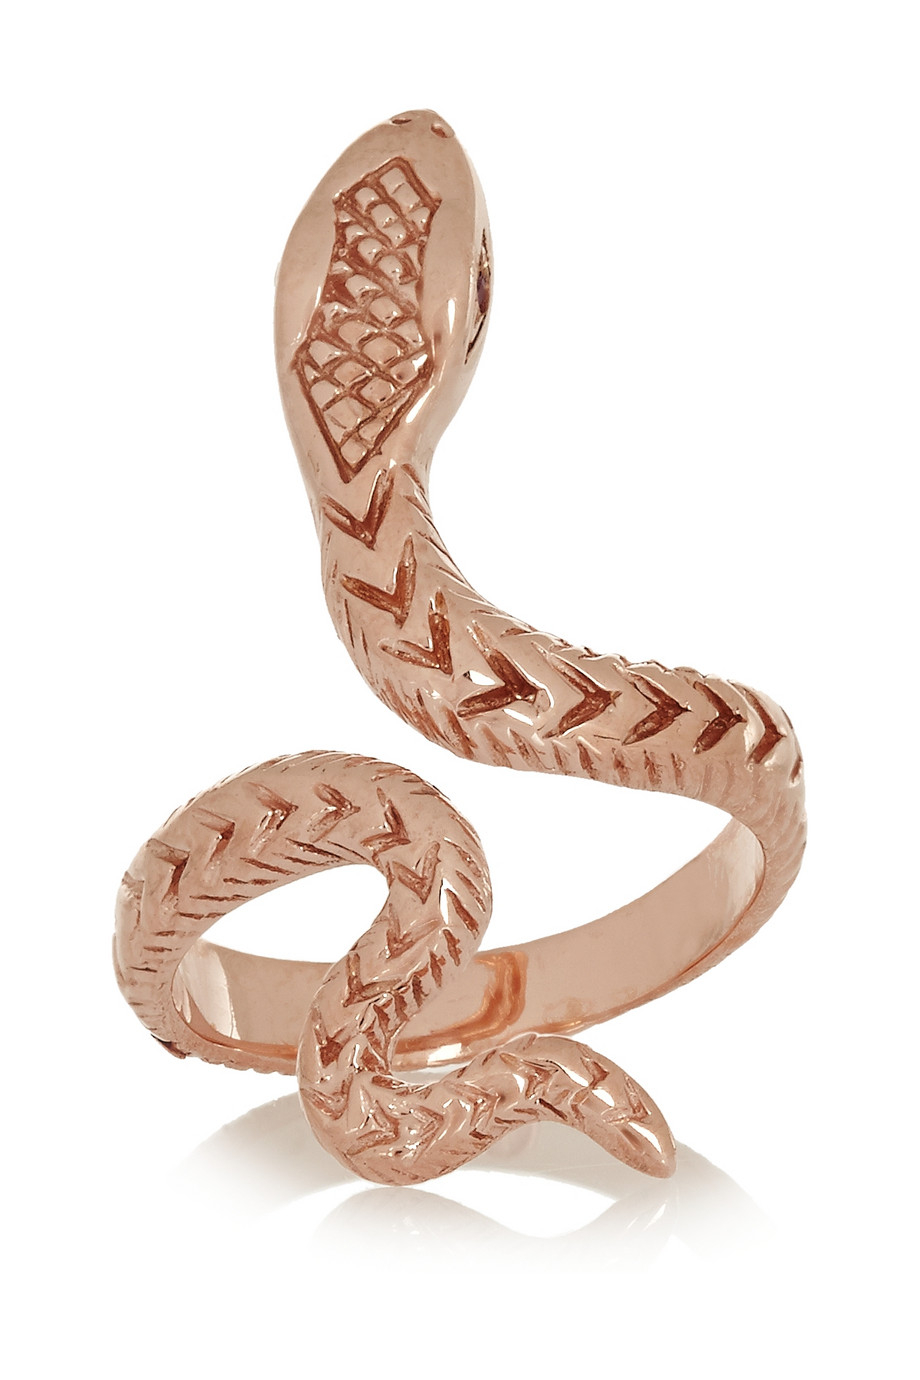 Lyst - Iam By Ileana Makri Rose Goldplated Ruby Snake Ring in Pink